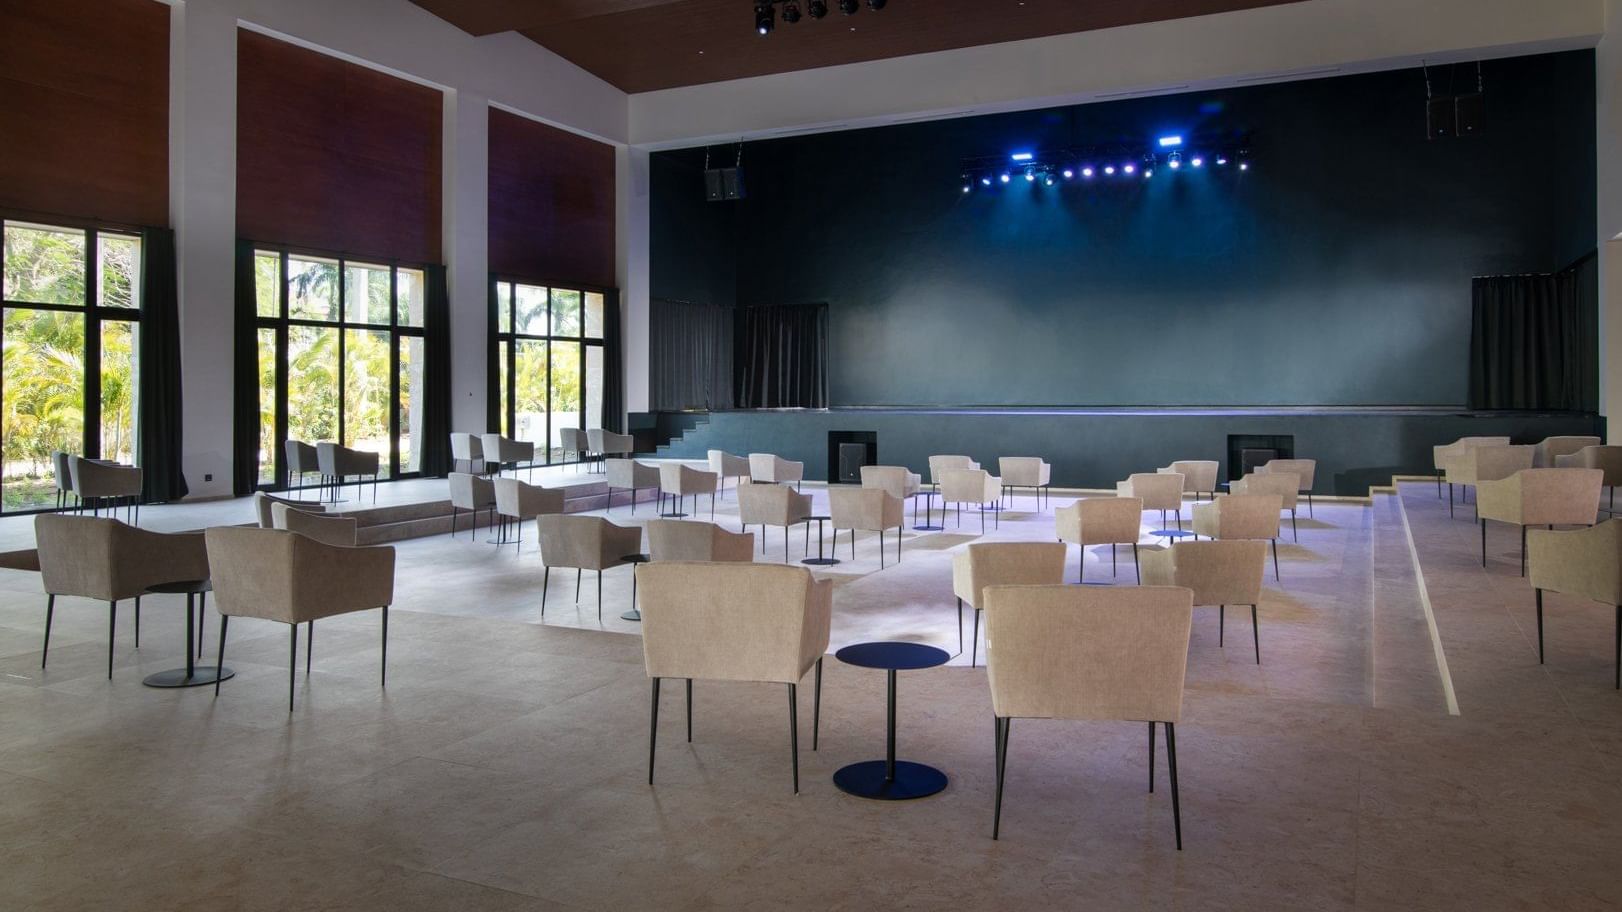 Stage & seating arrangements in the theatre, Live Aqua Resorts